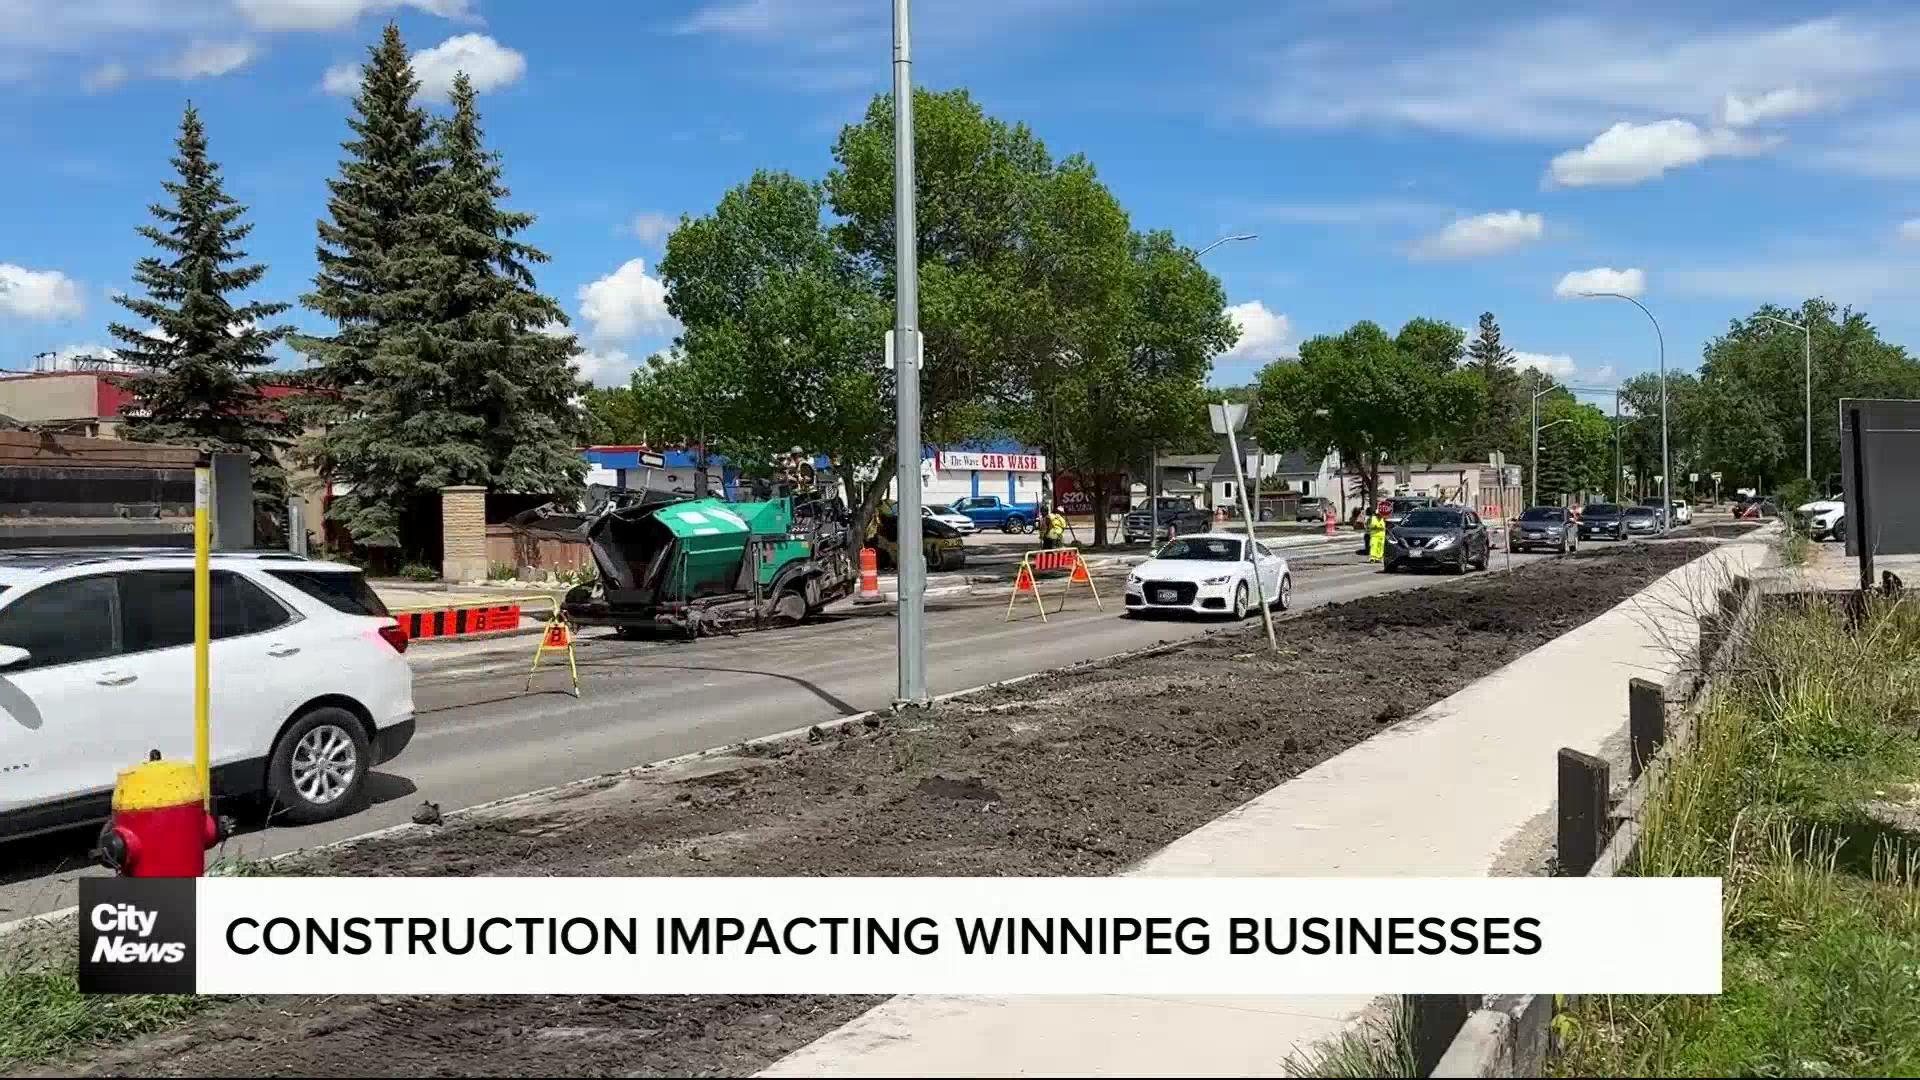 Winnipeg businesses impacted by construction